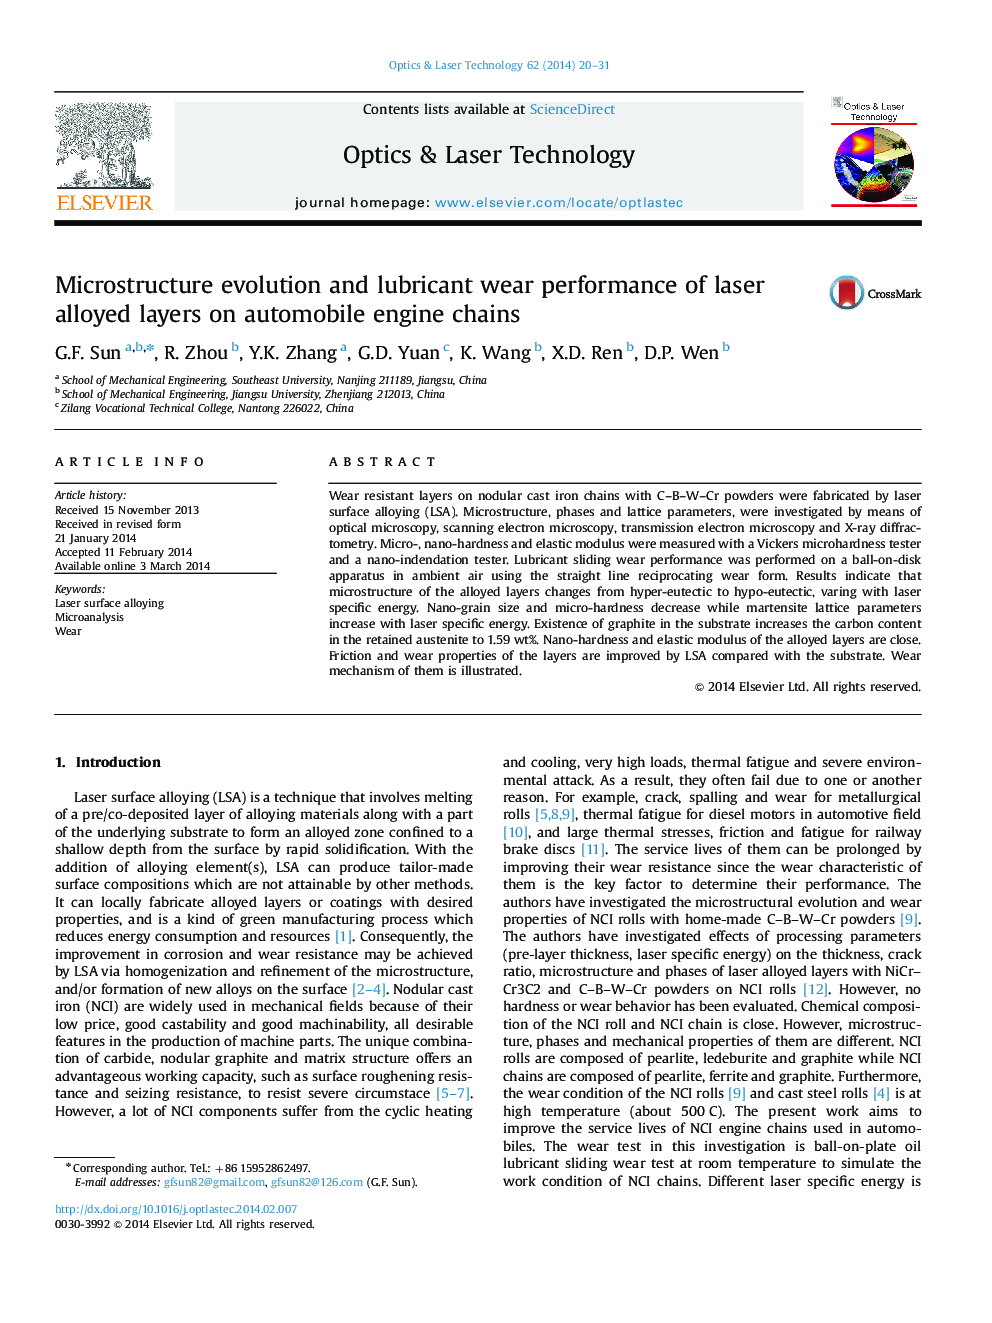 Microstructure evolution and lubricant wear performance of laser alloyed layers on automobile engine chains